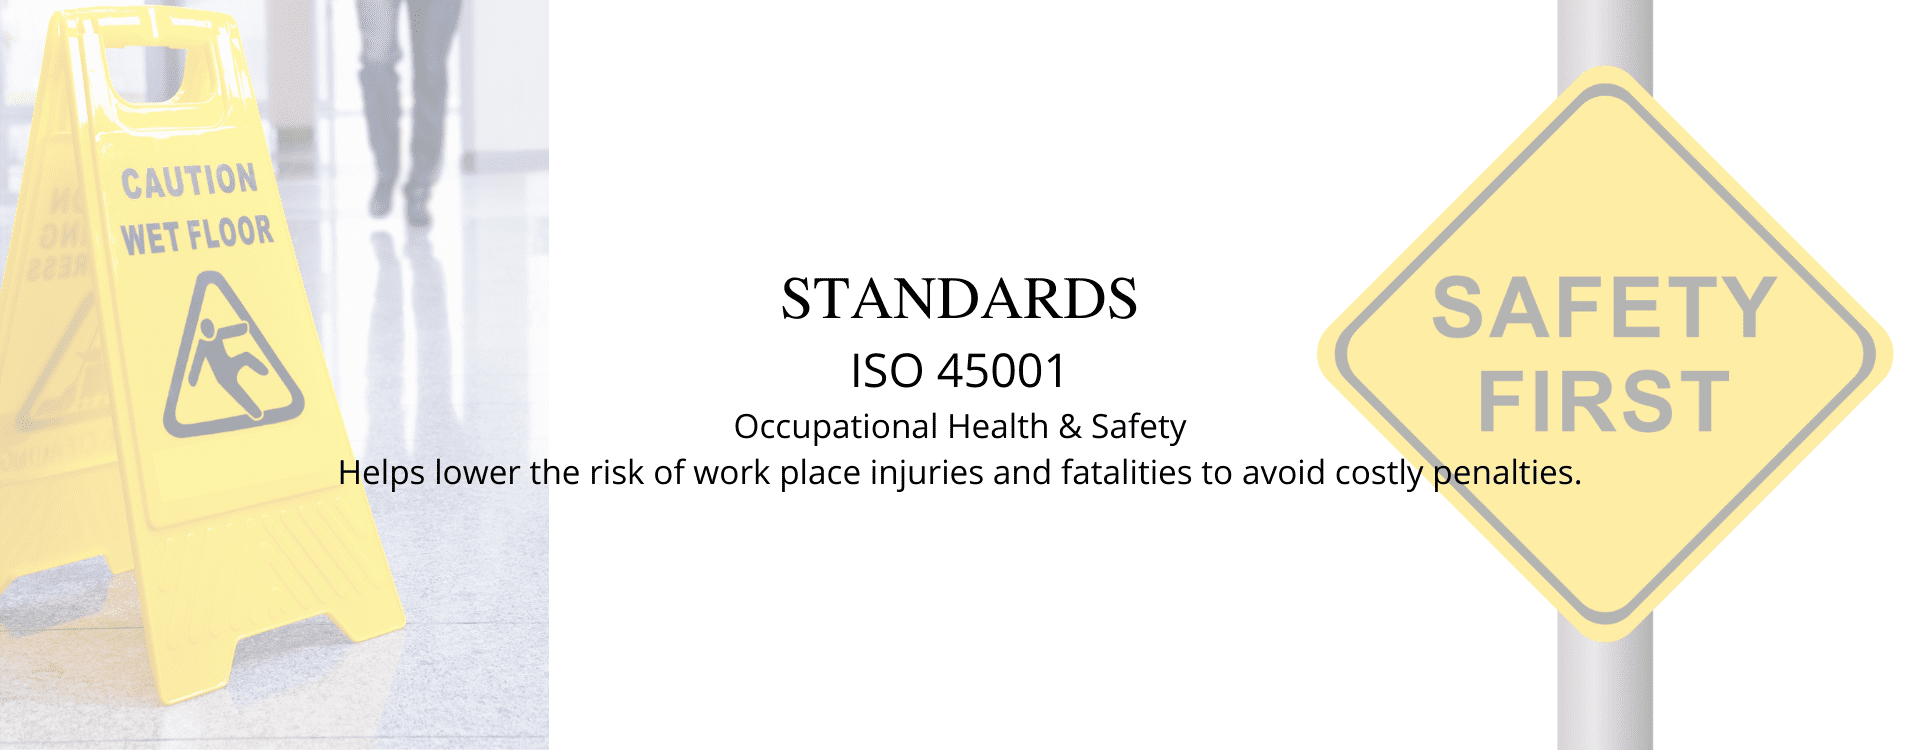 ISO 45001 Occupational Health & Safety